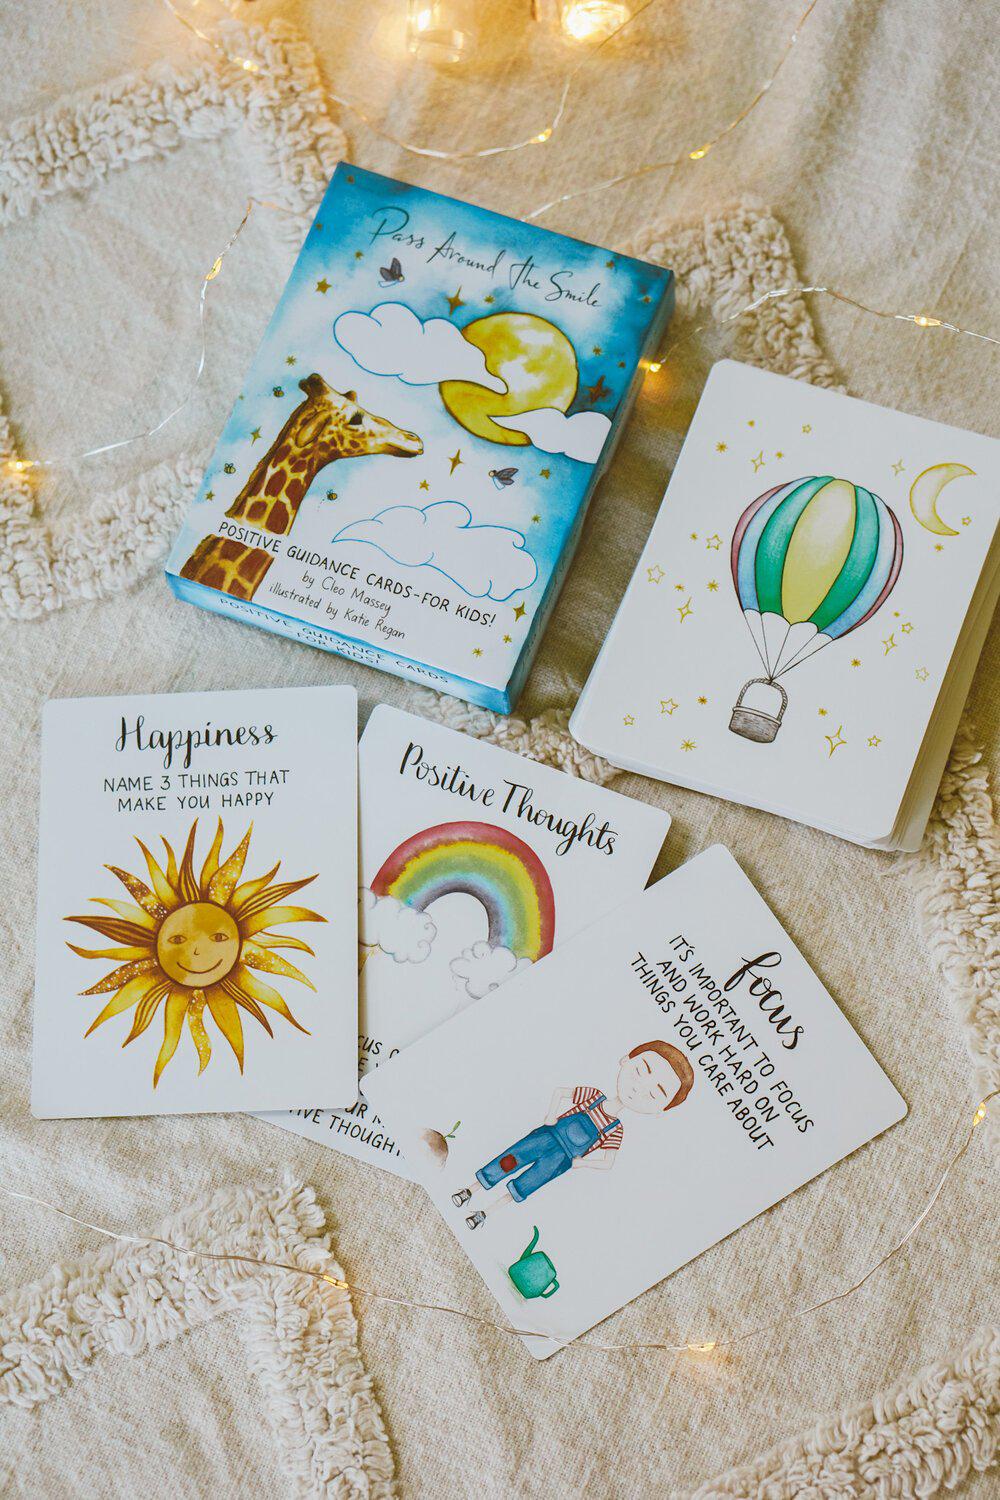 Positive Guidance Cards - For Kids!